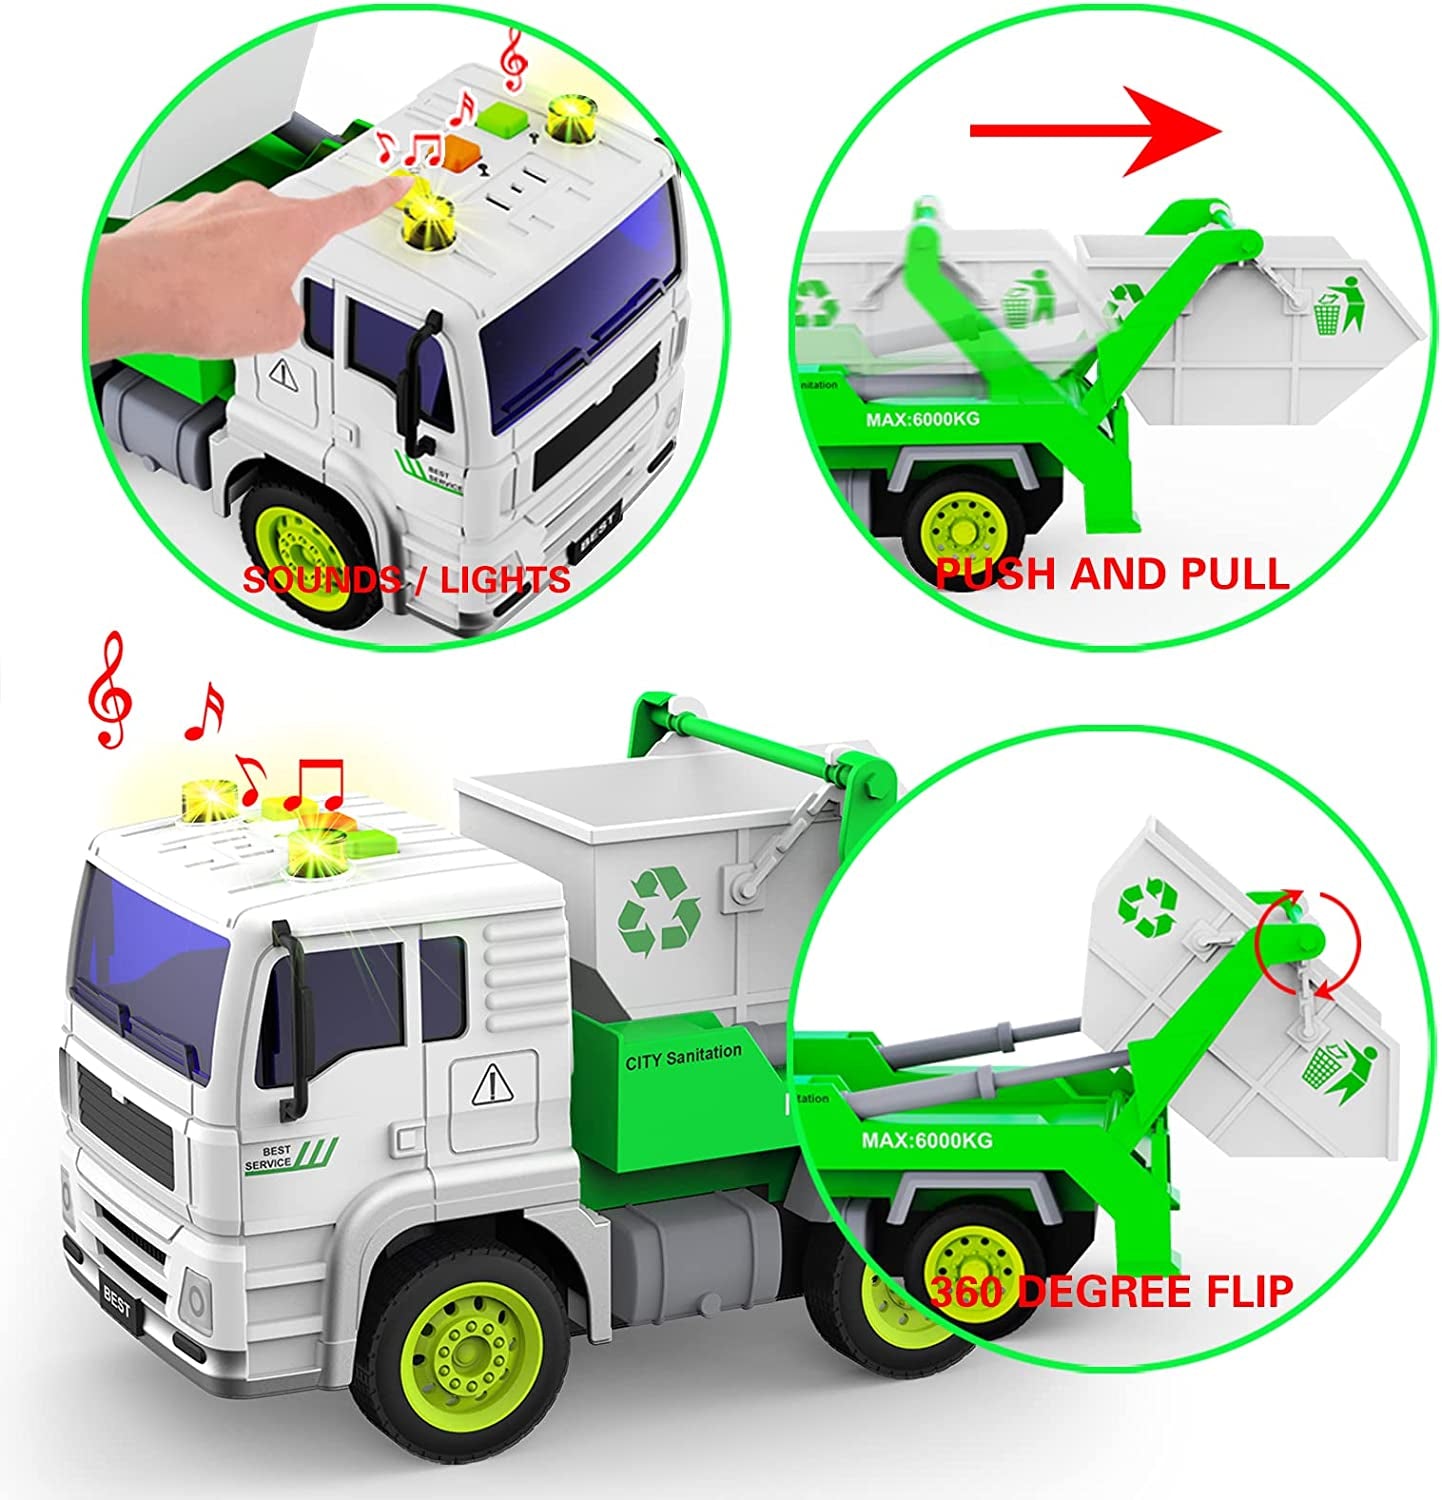 Garbage Truck Toys, 2 in 1 Friction-Powered Trash Truck Toys with Light and Sound, Back Dump Garbage Recycle Truck Toy Set with 4 Trash Cans, Playmobile Toy for Kids